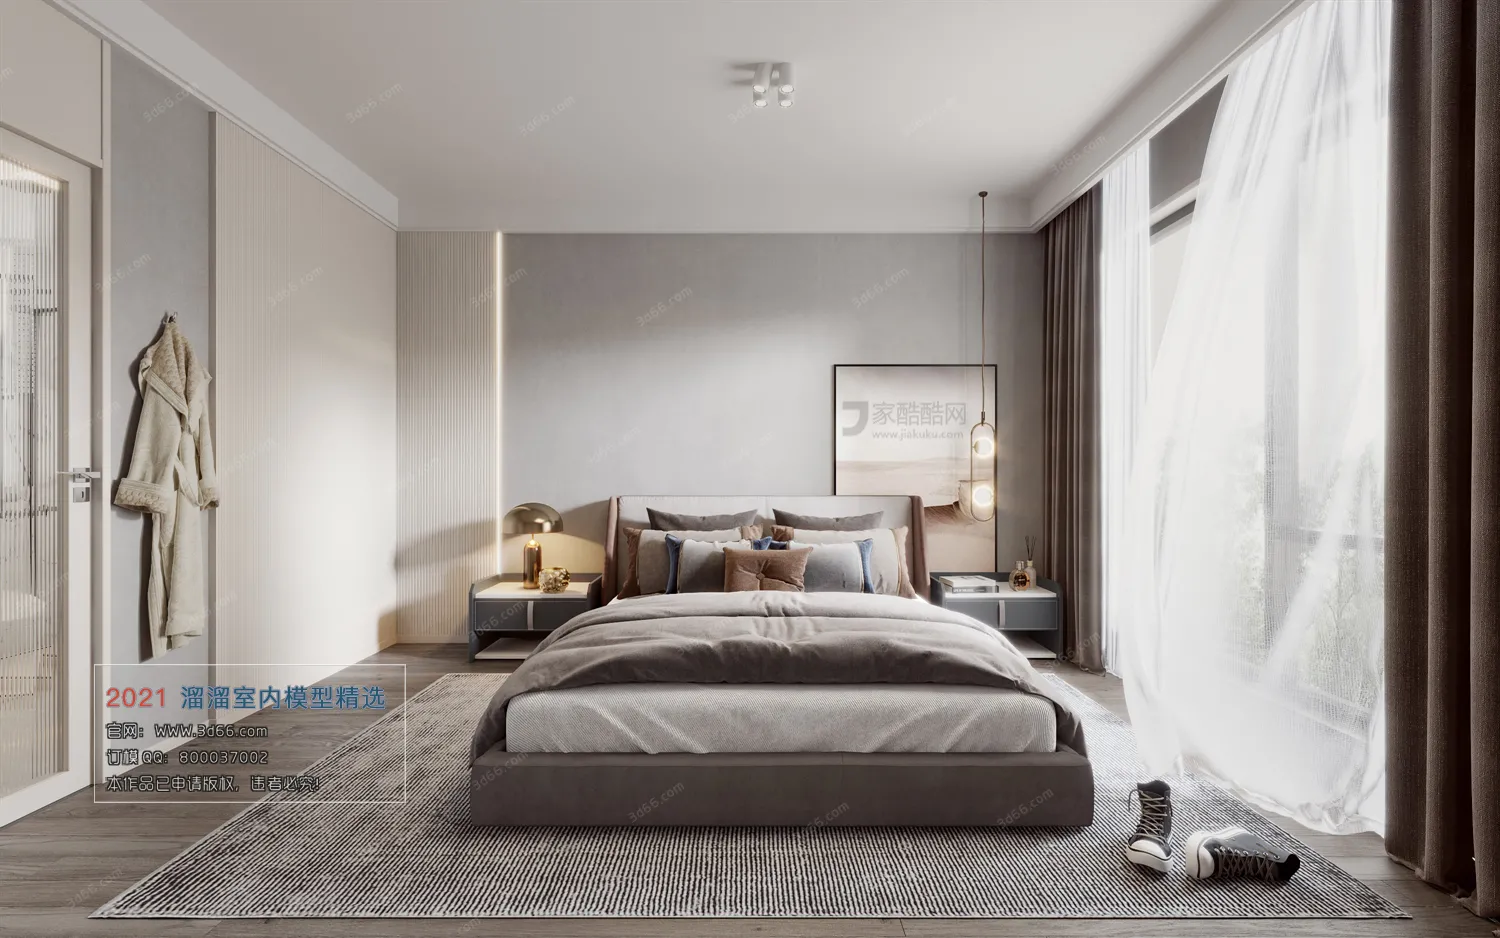 BEDROOM – A005-Modern style-Vray model